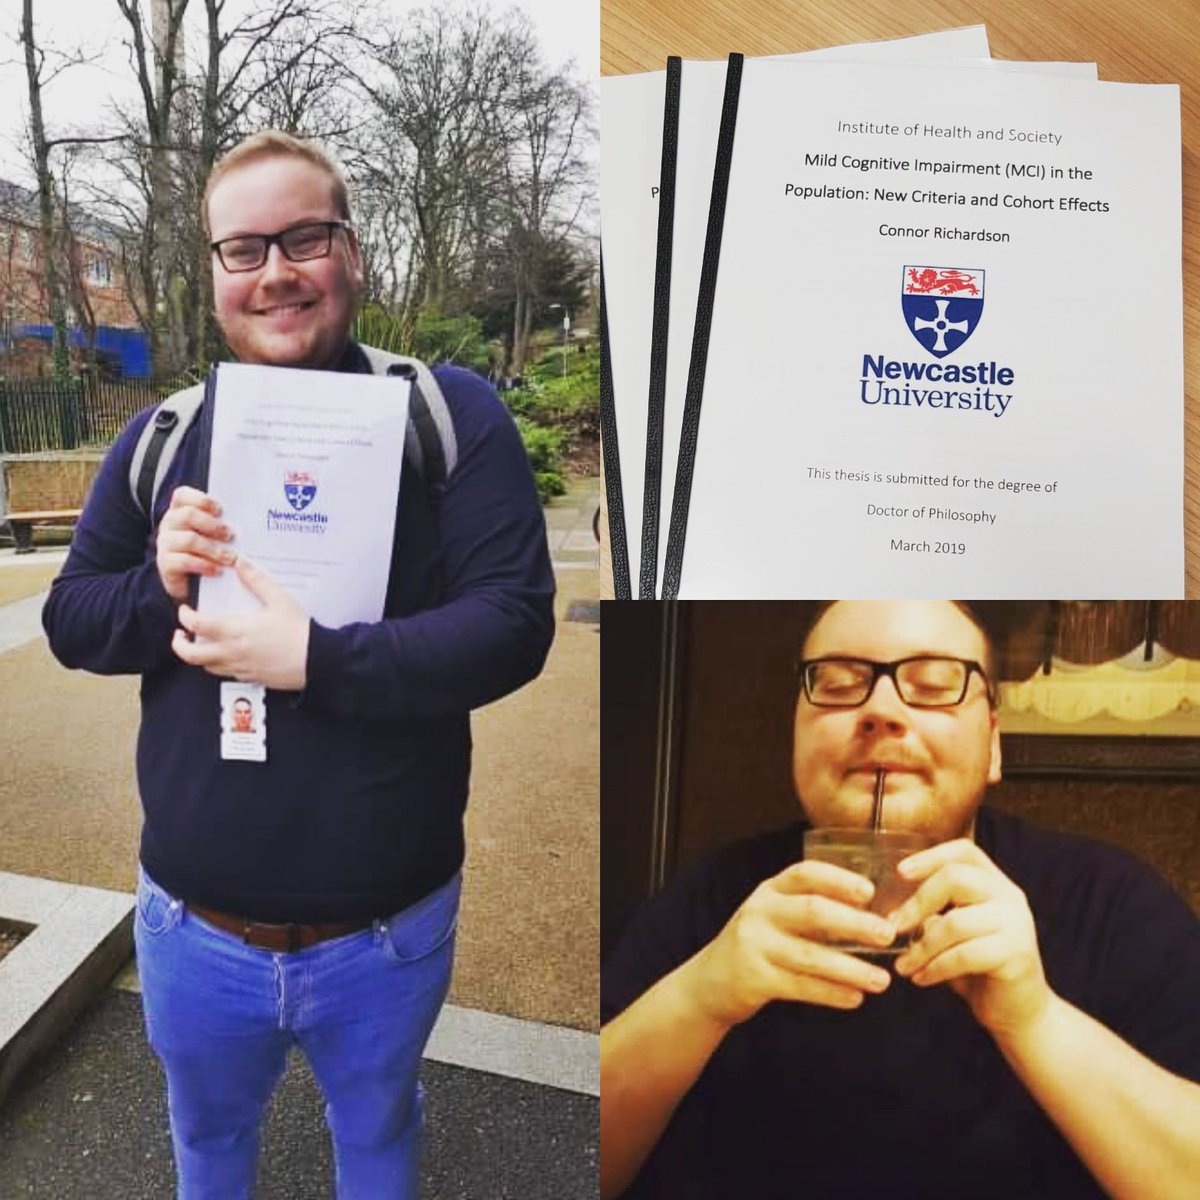 Three years and my thesis is finally submitted, now I'm ready for a drink and the best night's sleep in a while! And then onto new exciting research! 

@alzheimerssoc @NCLAgeing @NclUni_IHS #demenita #mildcognitiveimpairment #Alzheimers #PhDchat #phdlife #PhD